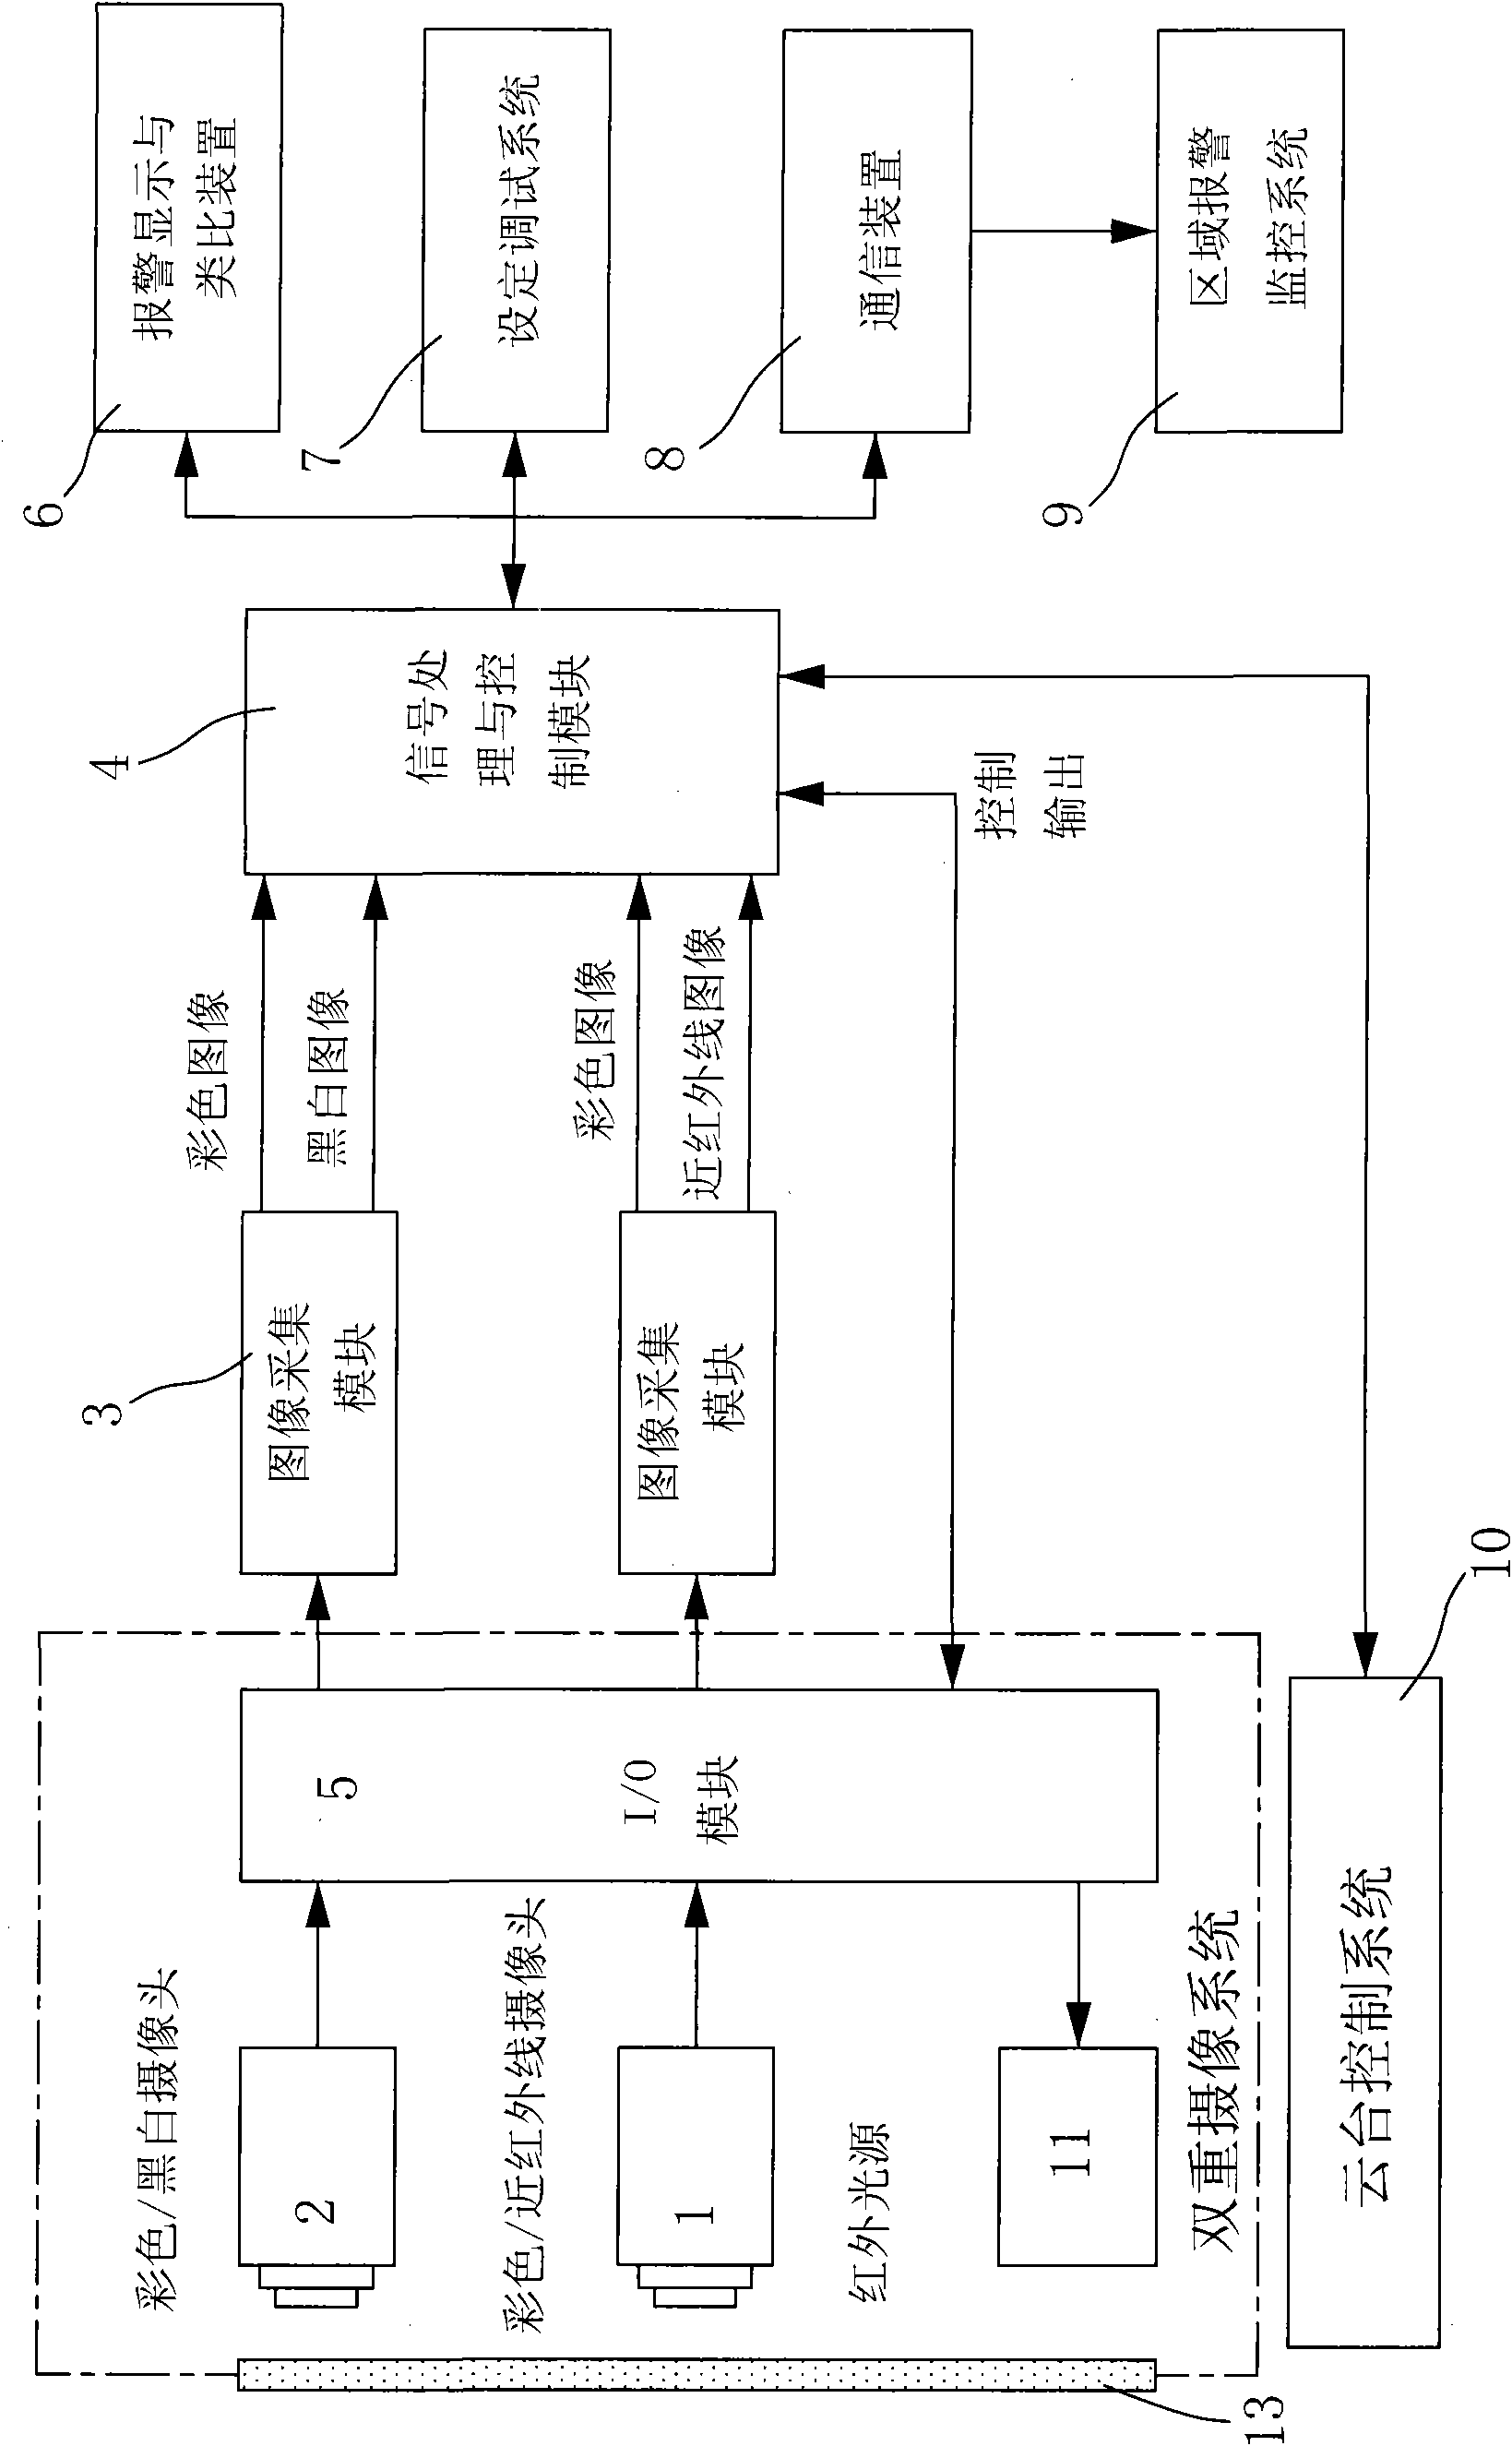 Multi-frequency image fire detection system